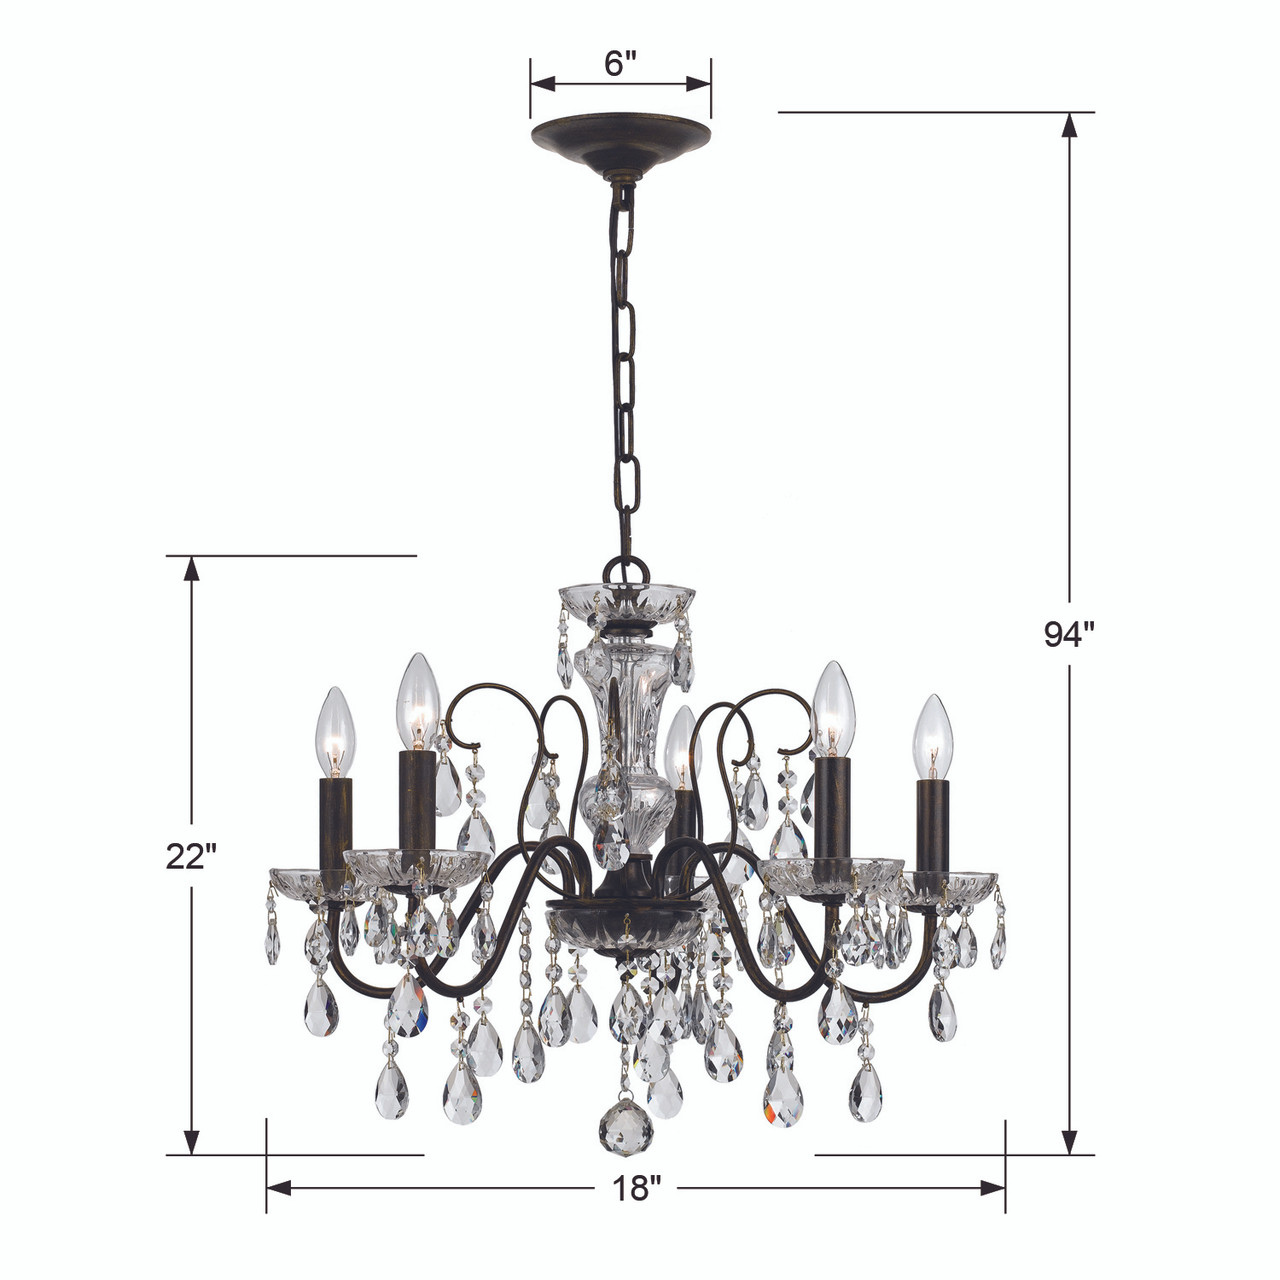 CRYSTORAMA 3025-EB-CL-S Butler 5 Light Clear Crystal English Bronze Chandelier